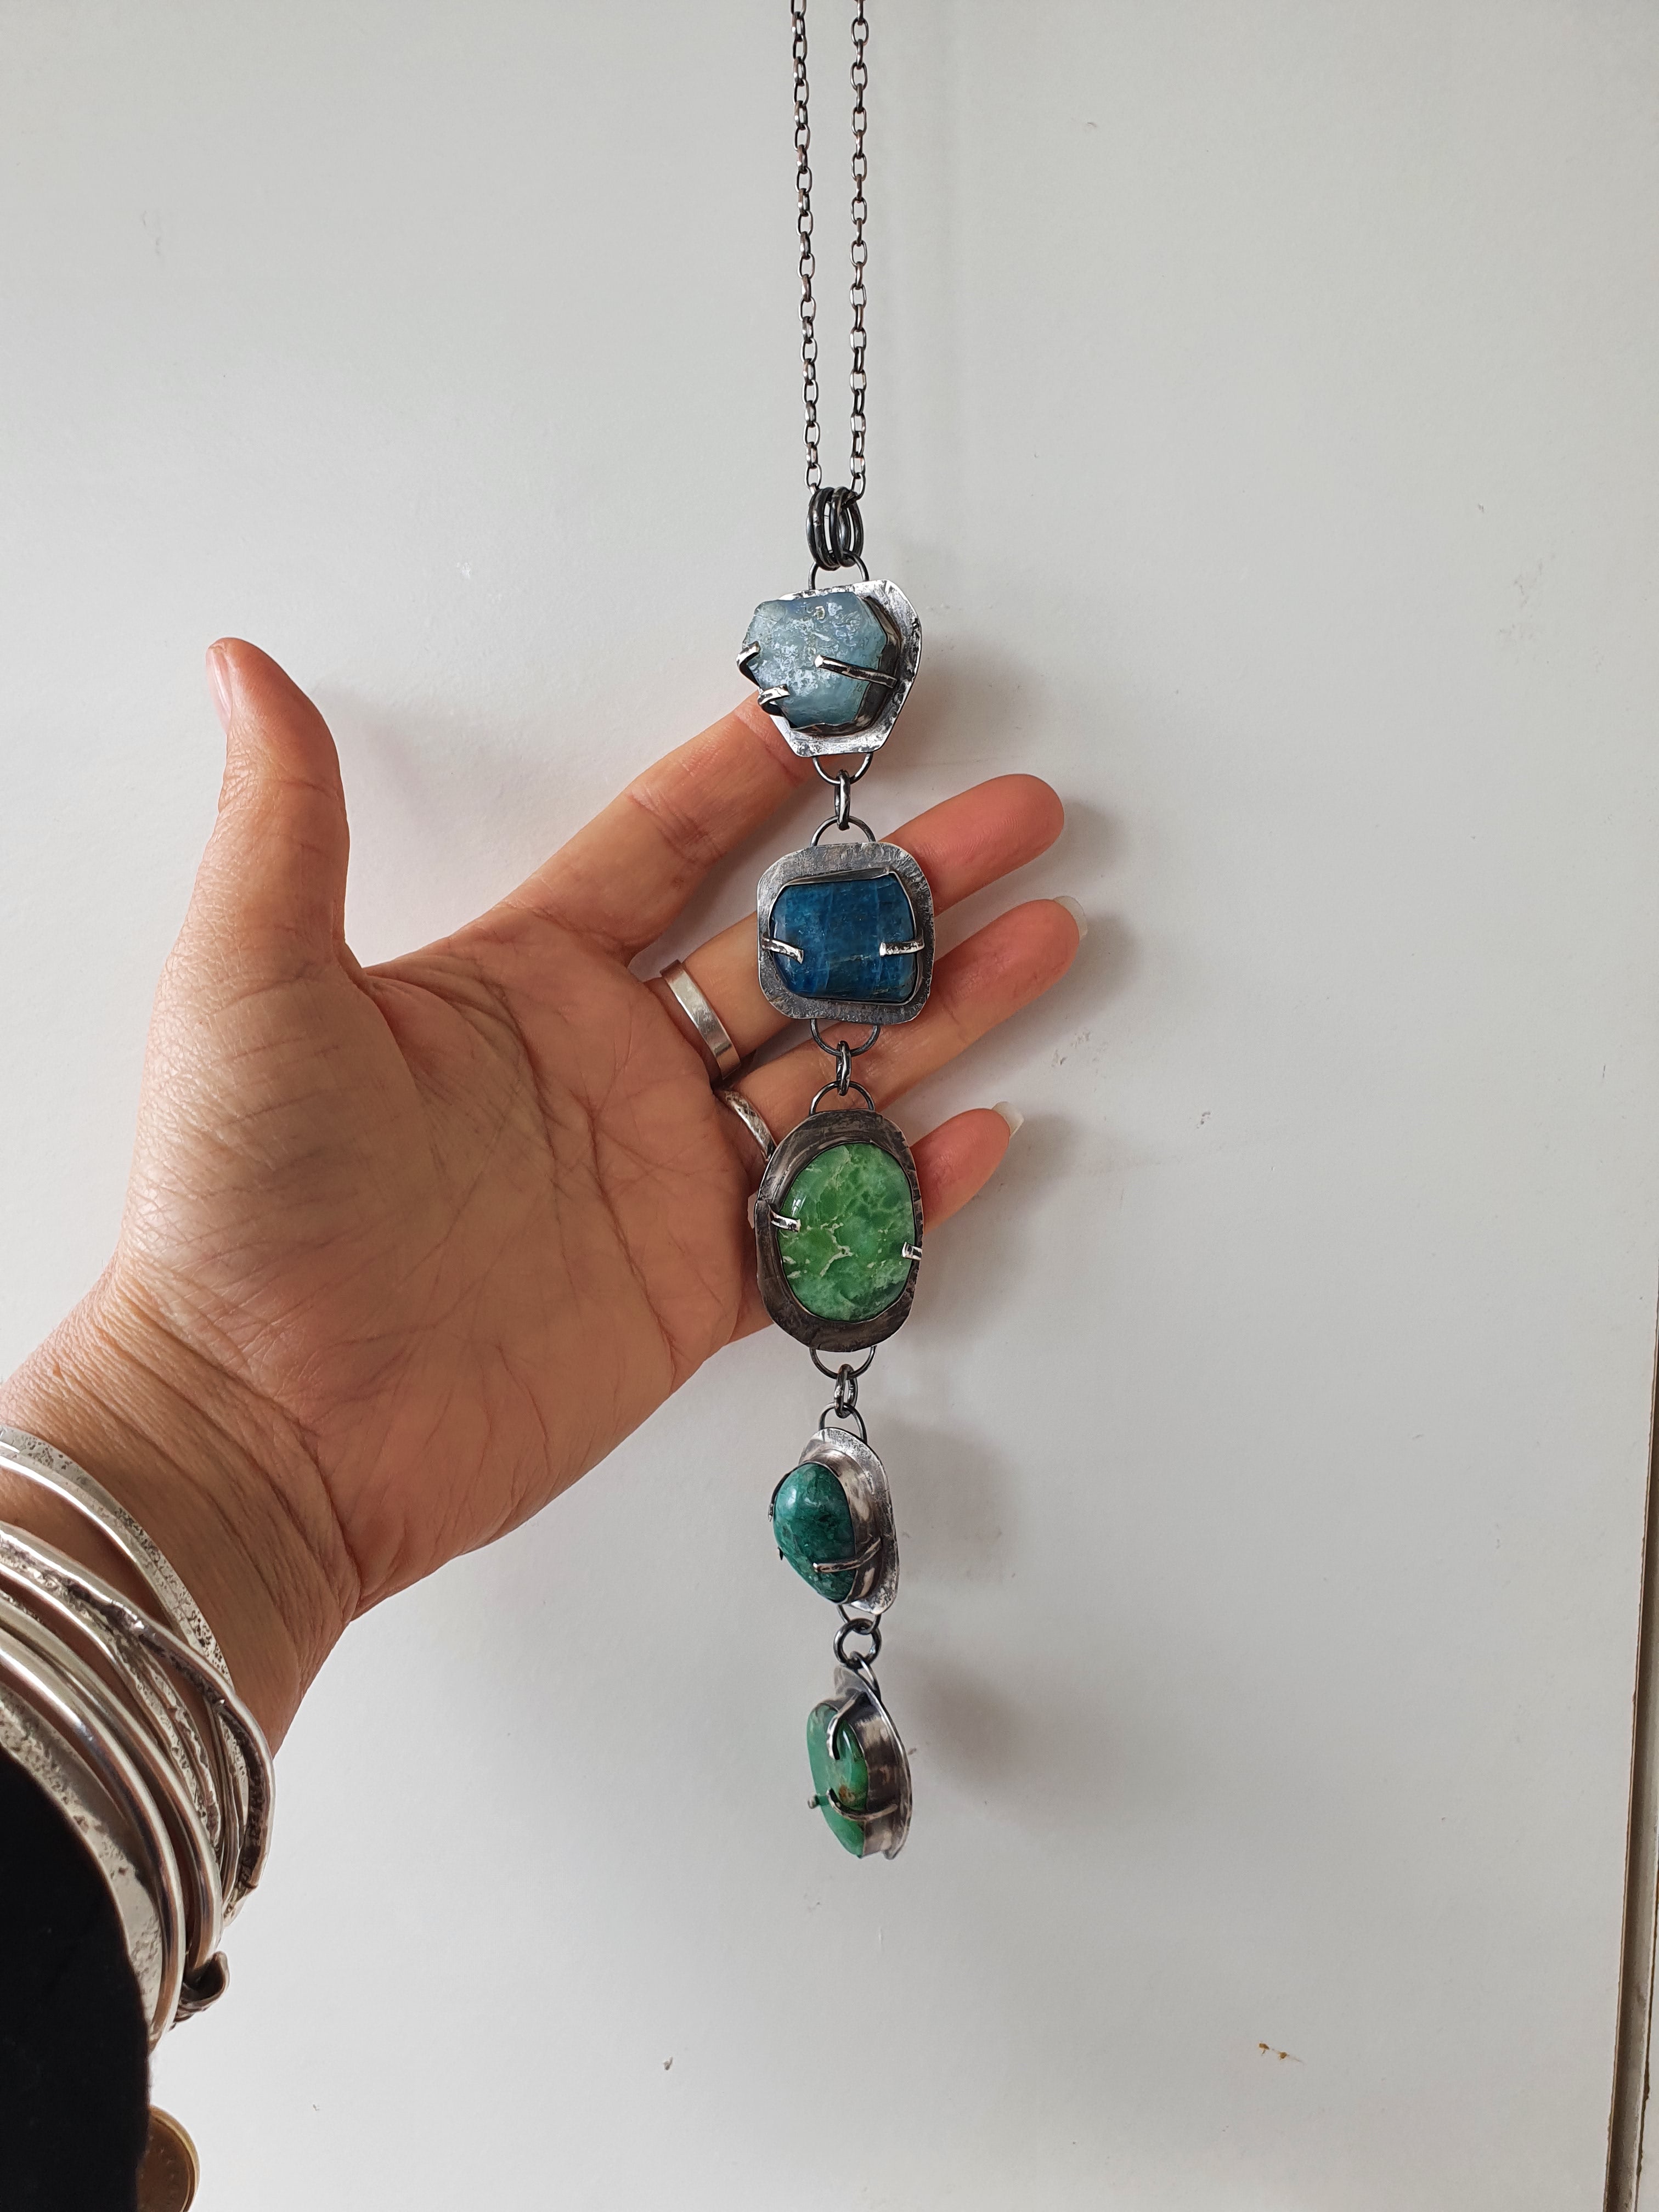 Keeping the Peace big totem silver and gemstone necklace.